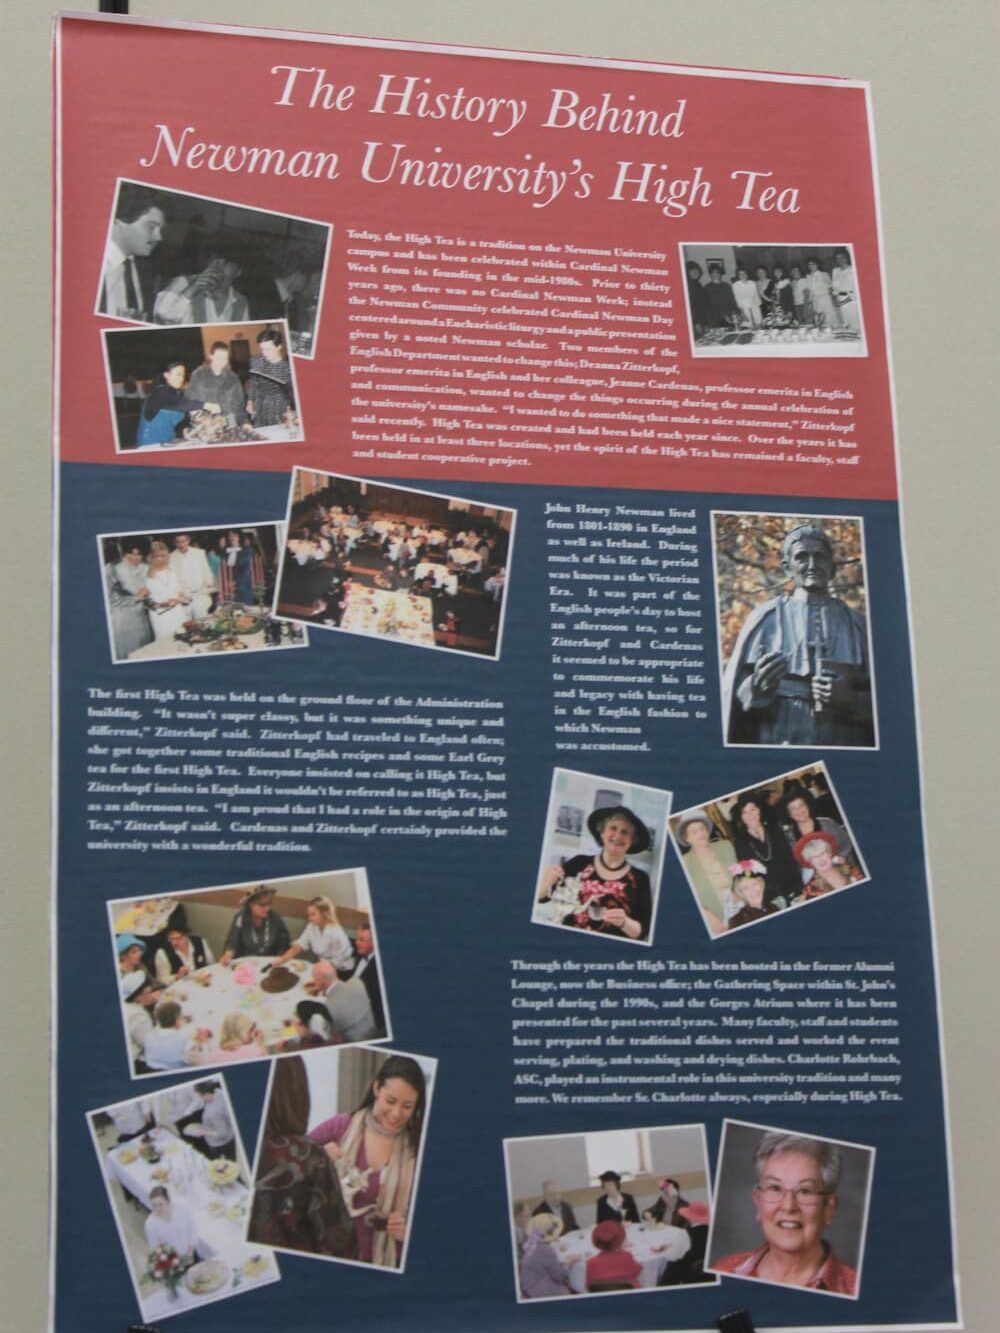 The poster reads, "Charlotte Rohrbach, ASC, played an instrumental role in this university tradition and many more. We remember Sister Charlotte always, but especially during High Tea."